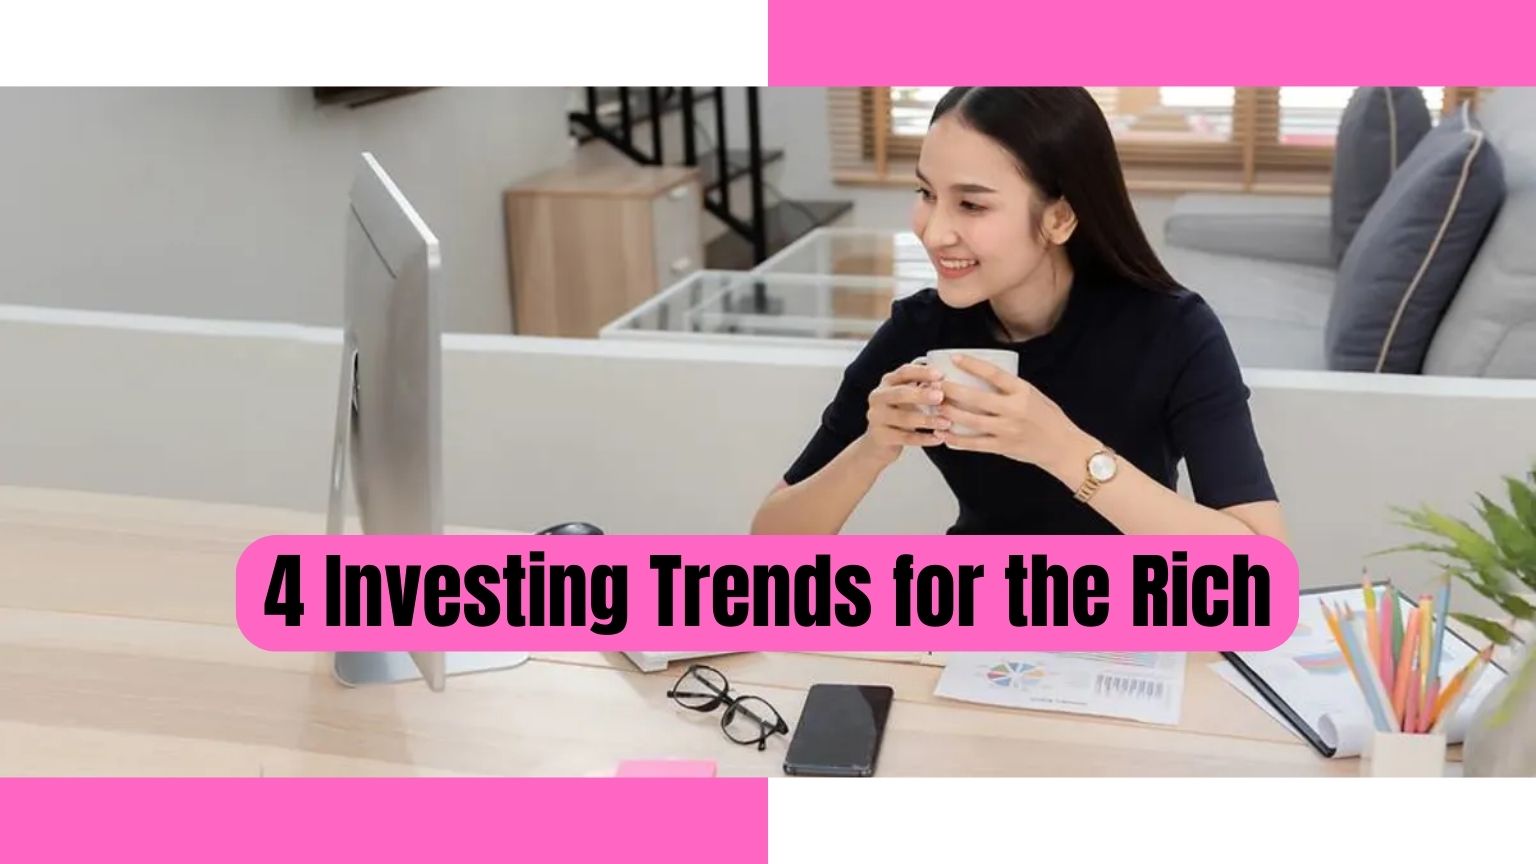 4 Investing Trends for the Rich, Investing Trends, investing, investment,